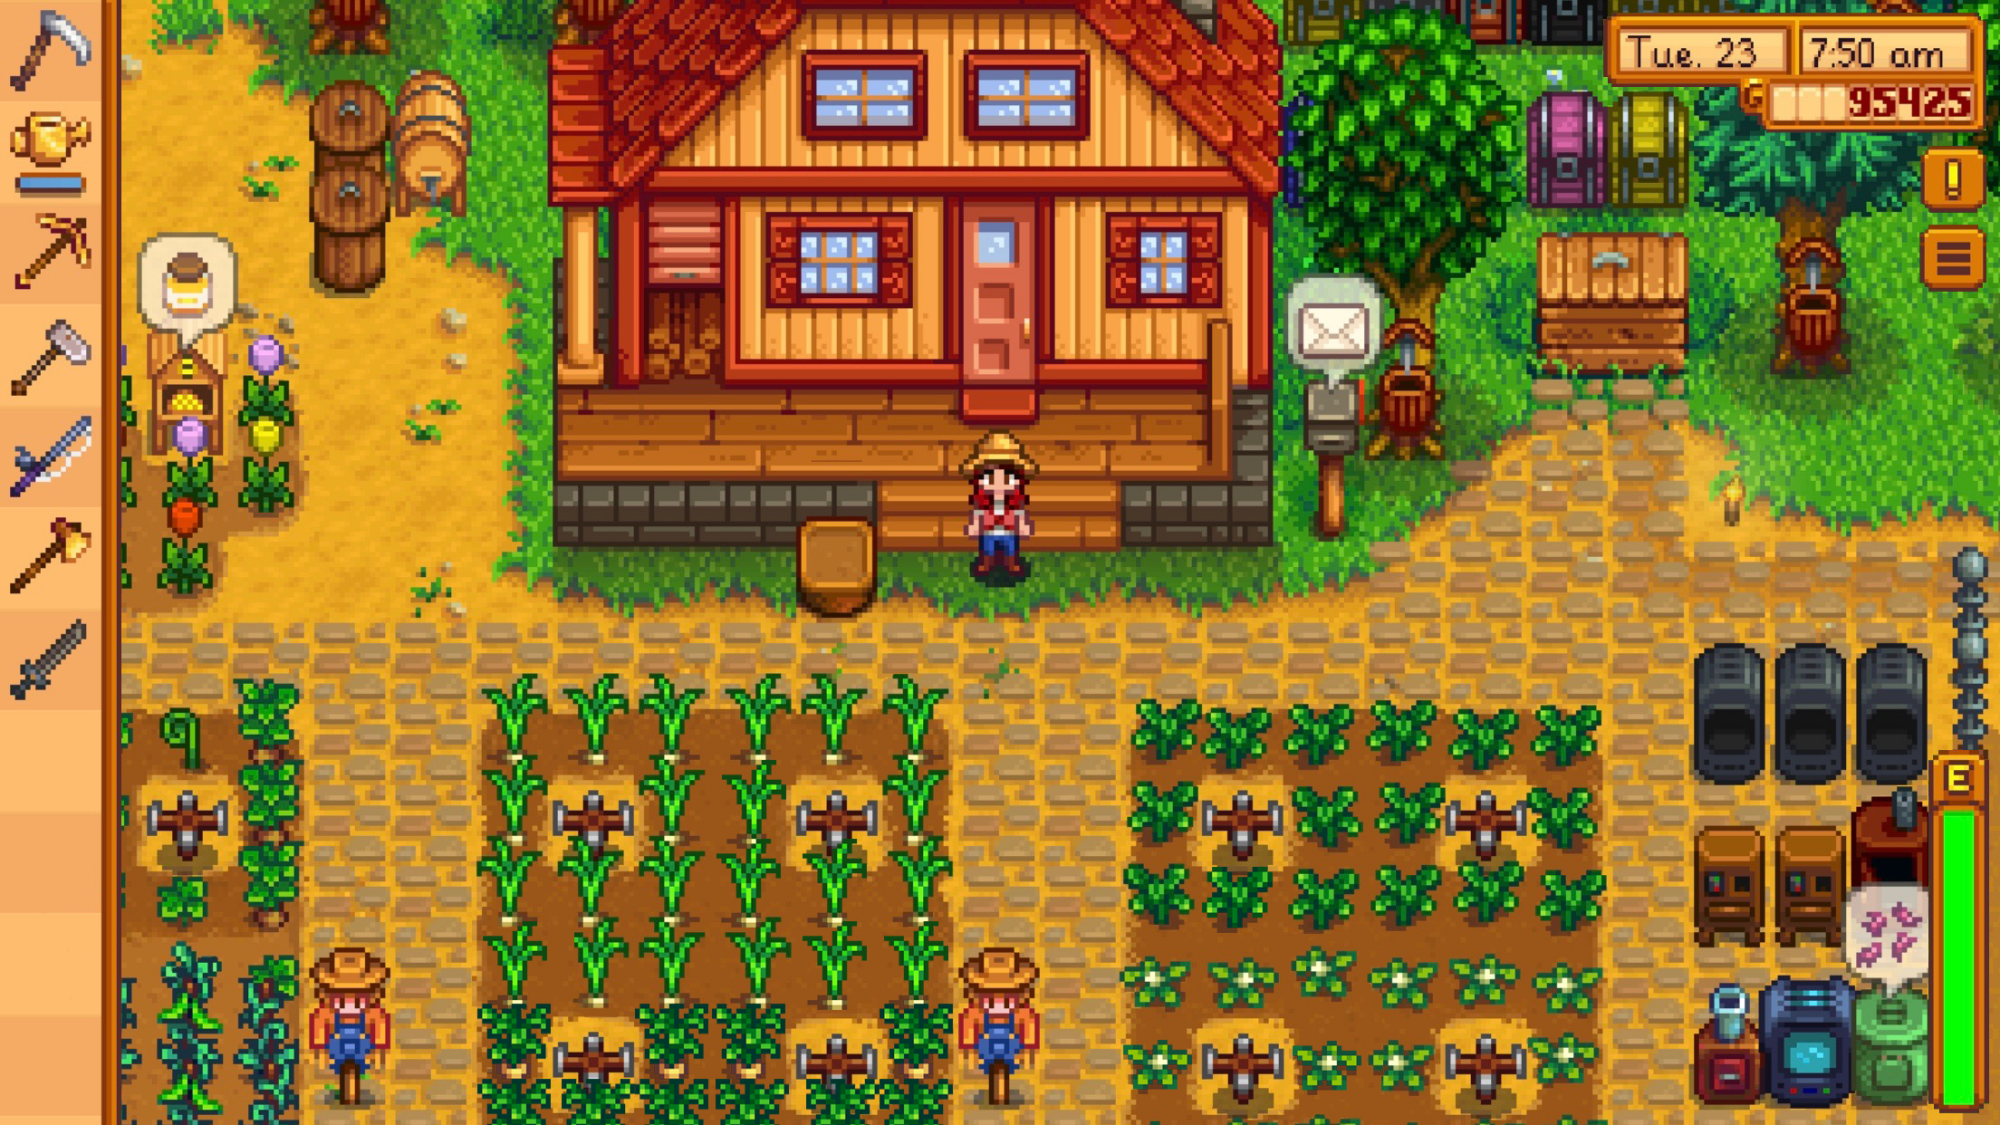 A screenshot of the game Stardew Valley showing the player on their farm.